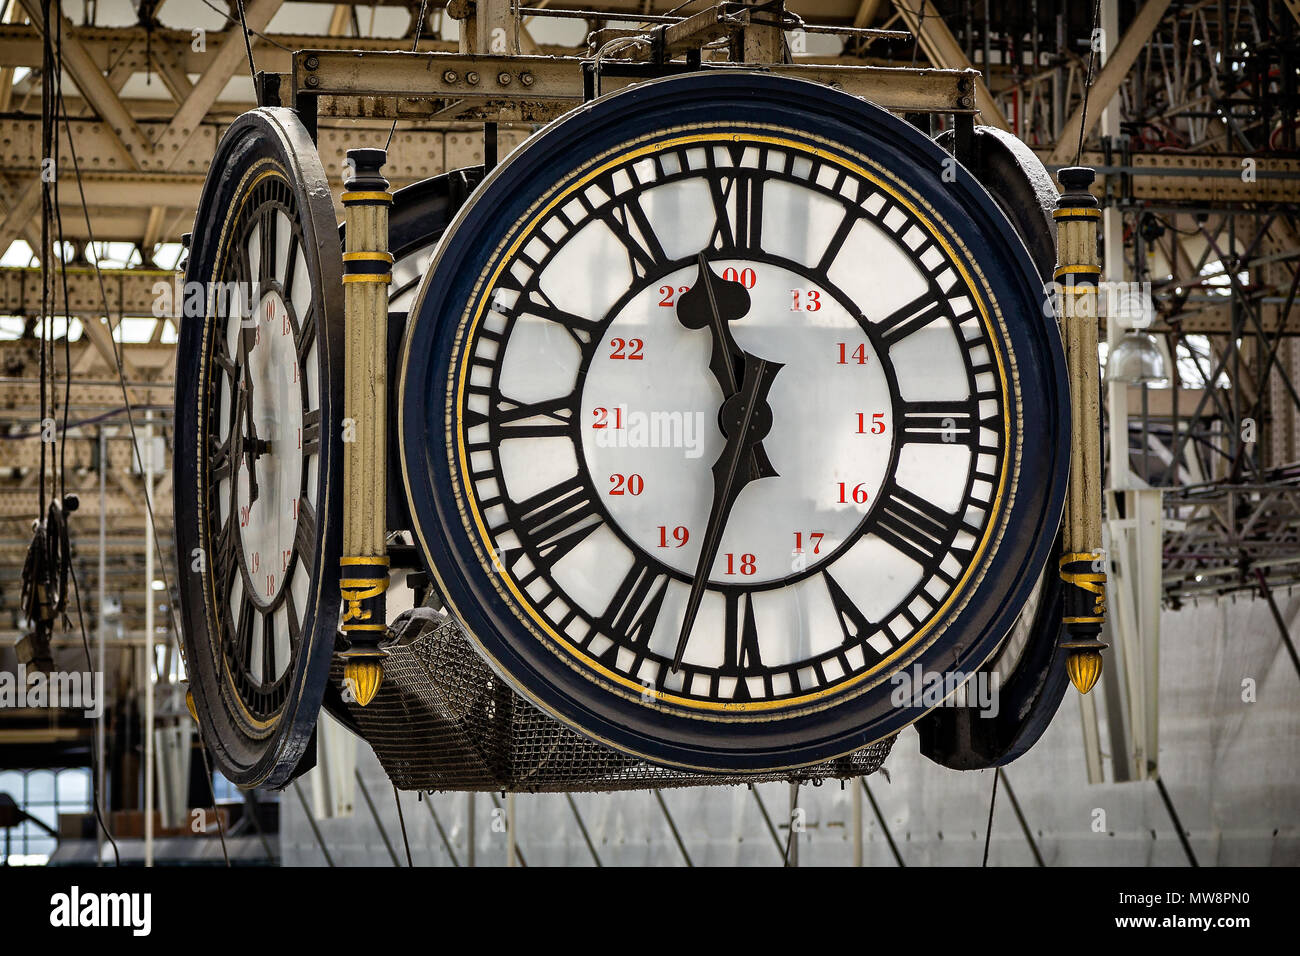 Close up of large hanging 4 sided clock face in Waterloo Station, London, UK taken on 13 August 2013 Stock Photo